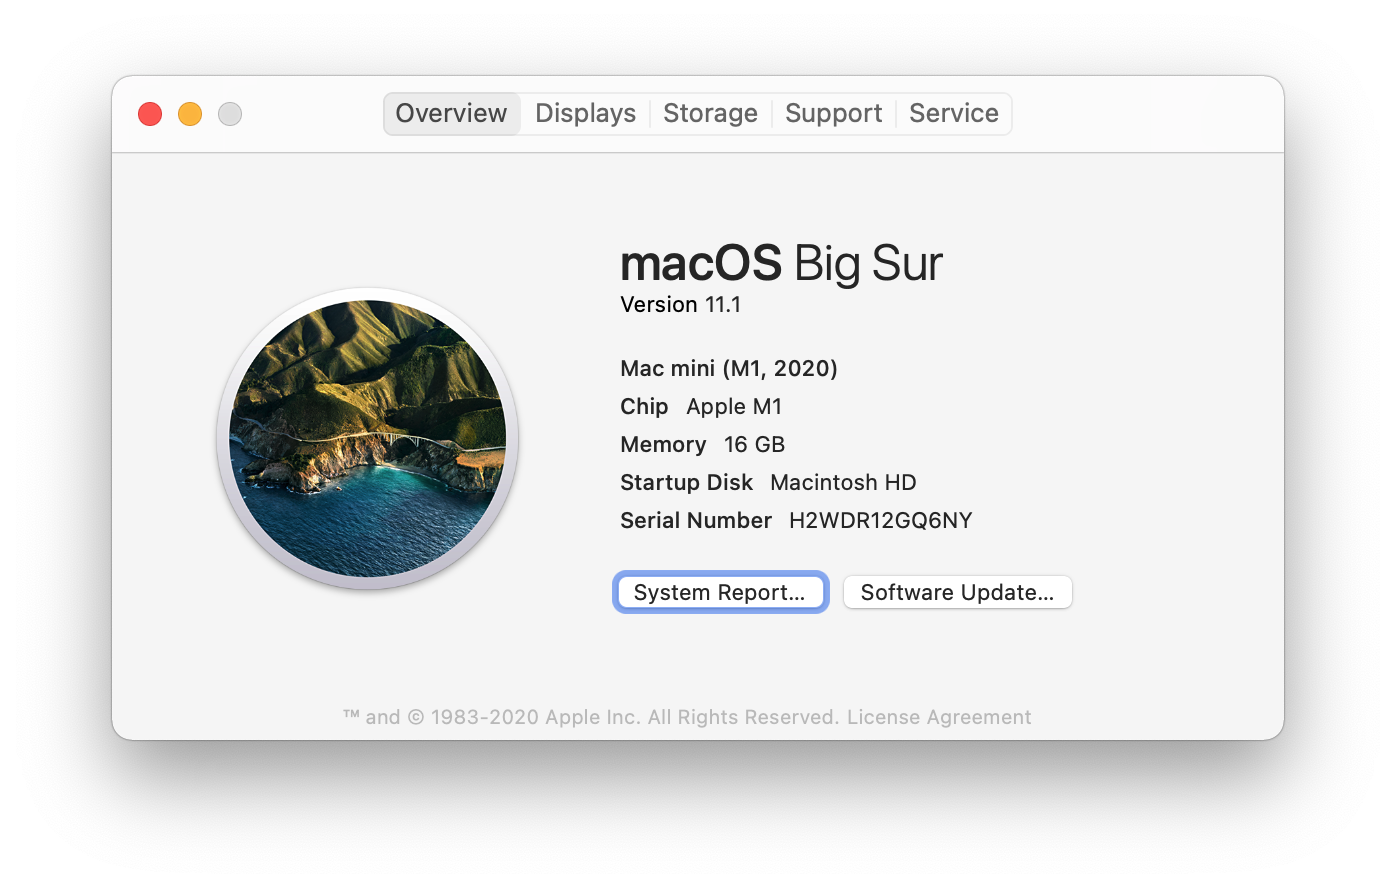 About this Mac dialog box showing a computer running macOS 11.1.